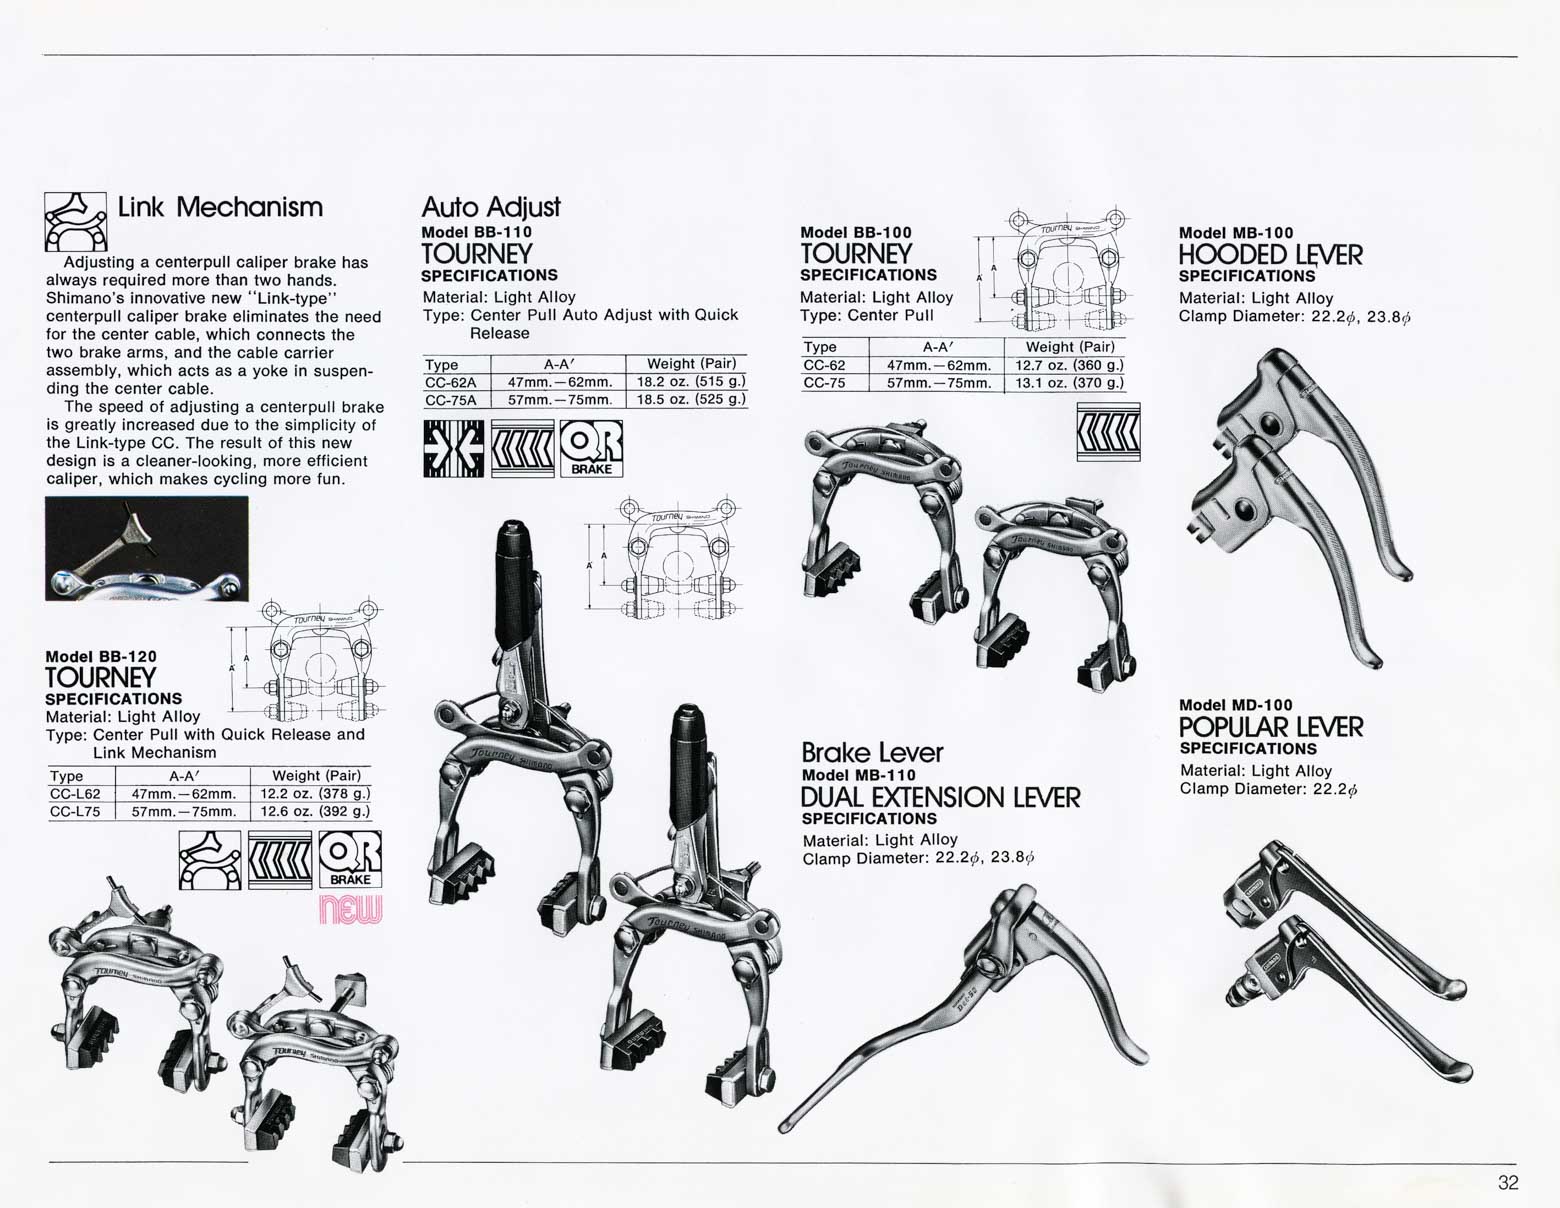 Shimano Bicycle System Components (1977) page 32 main image